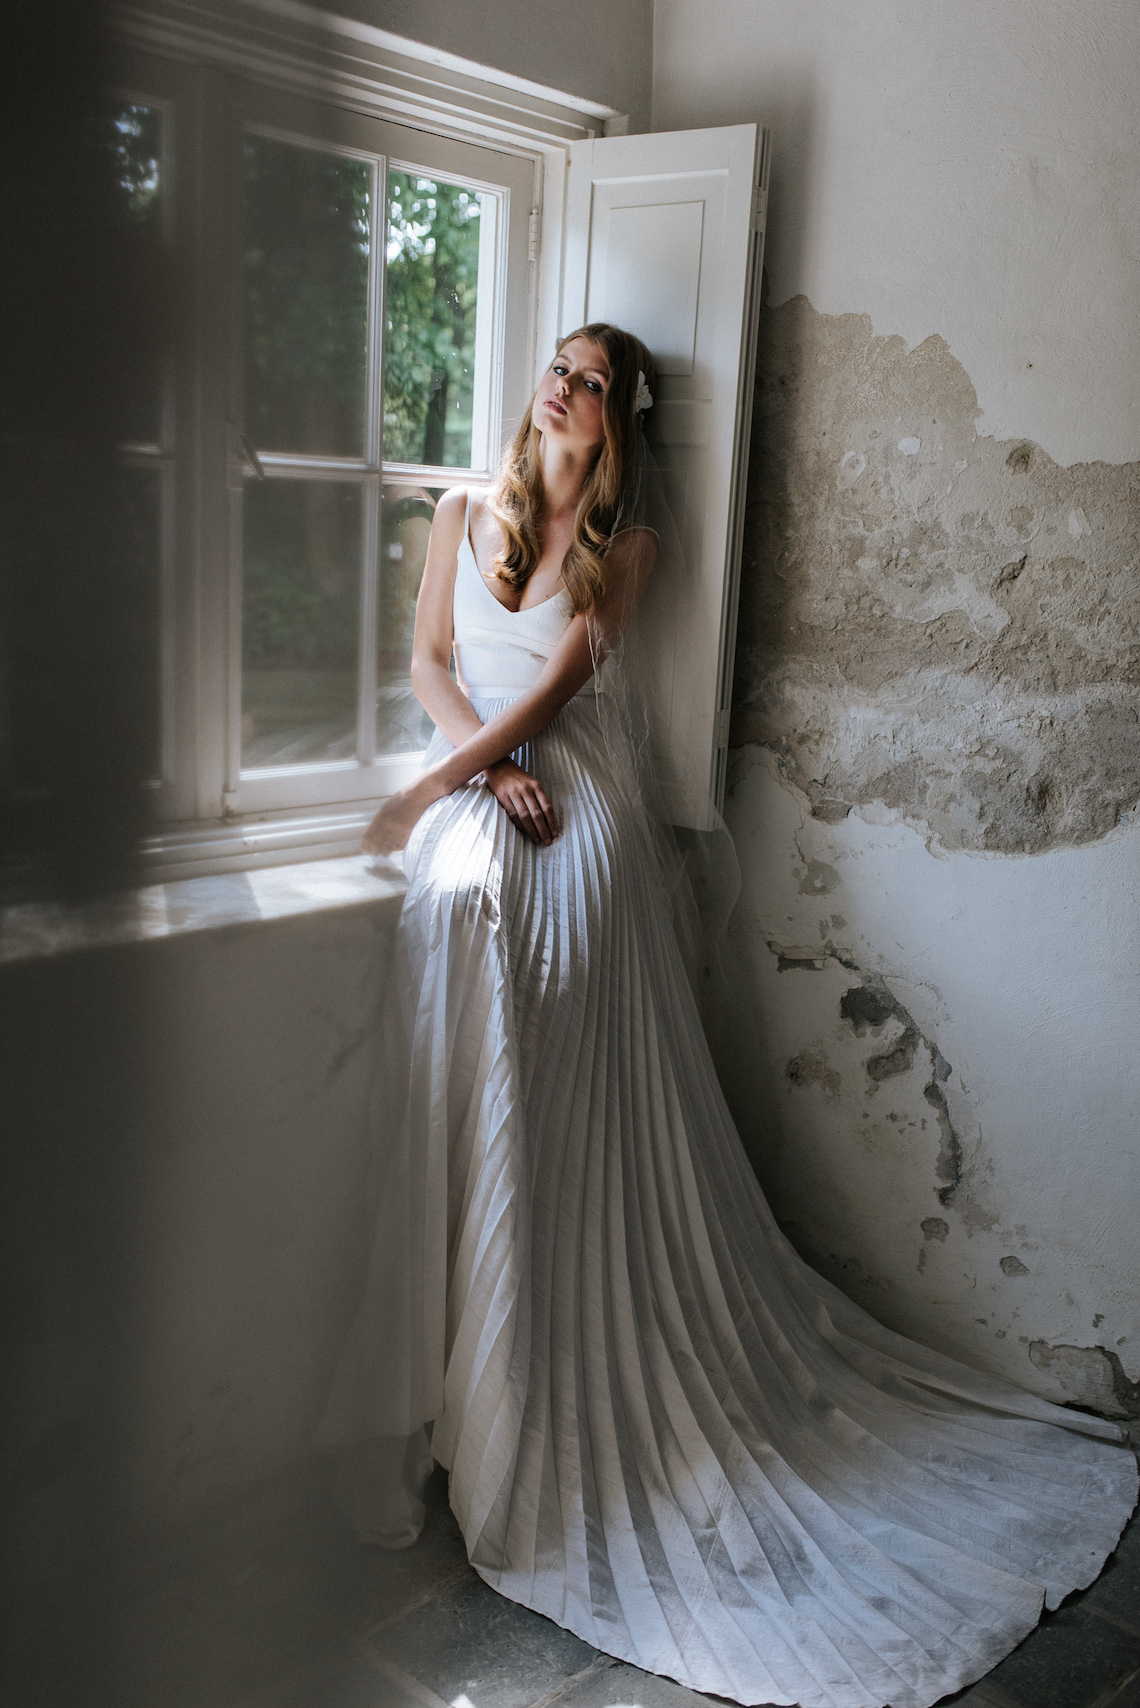 Wild Roses by Marilyn Bartman Photography and Wild at Heart Bridal 37